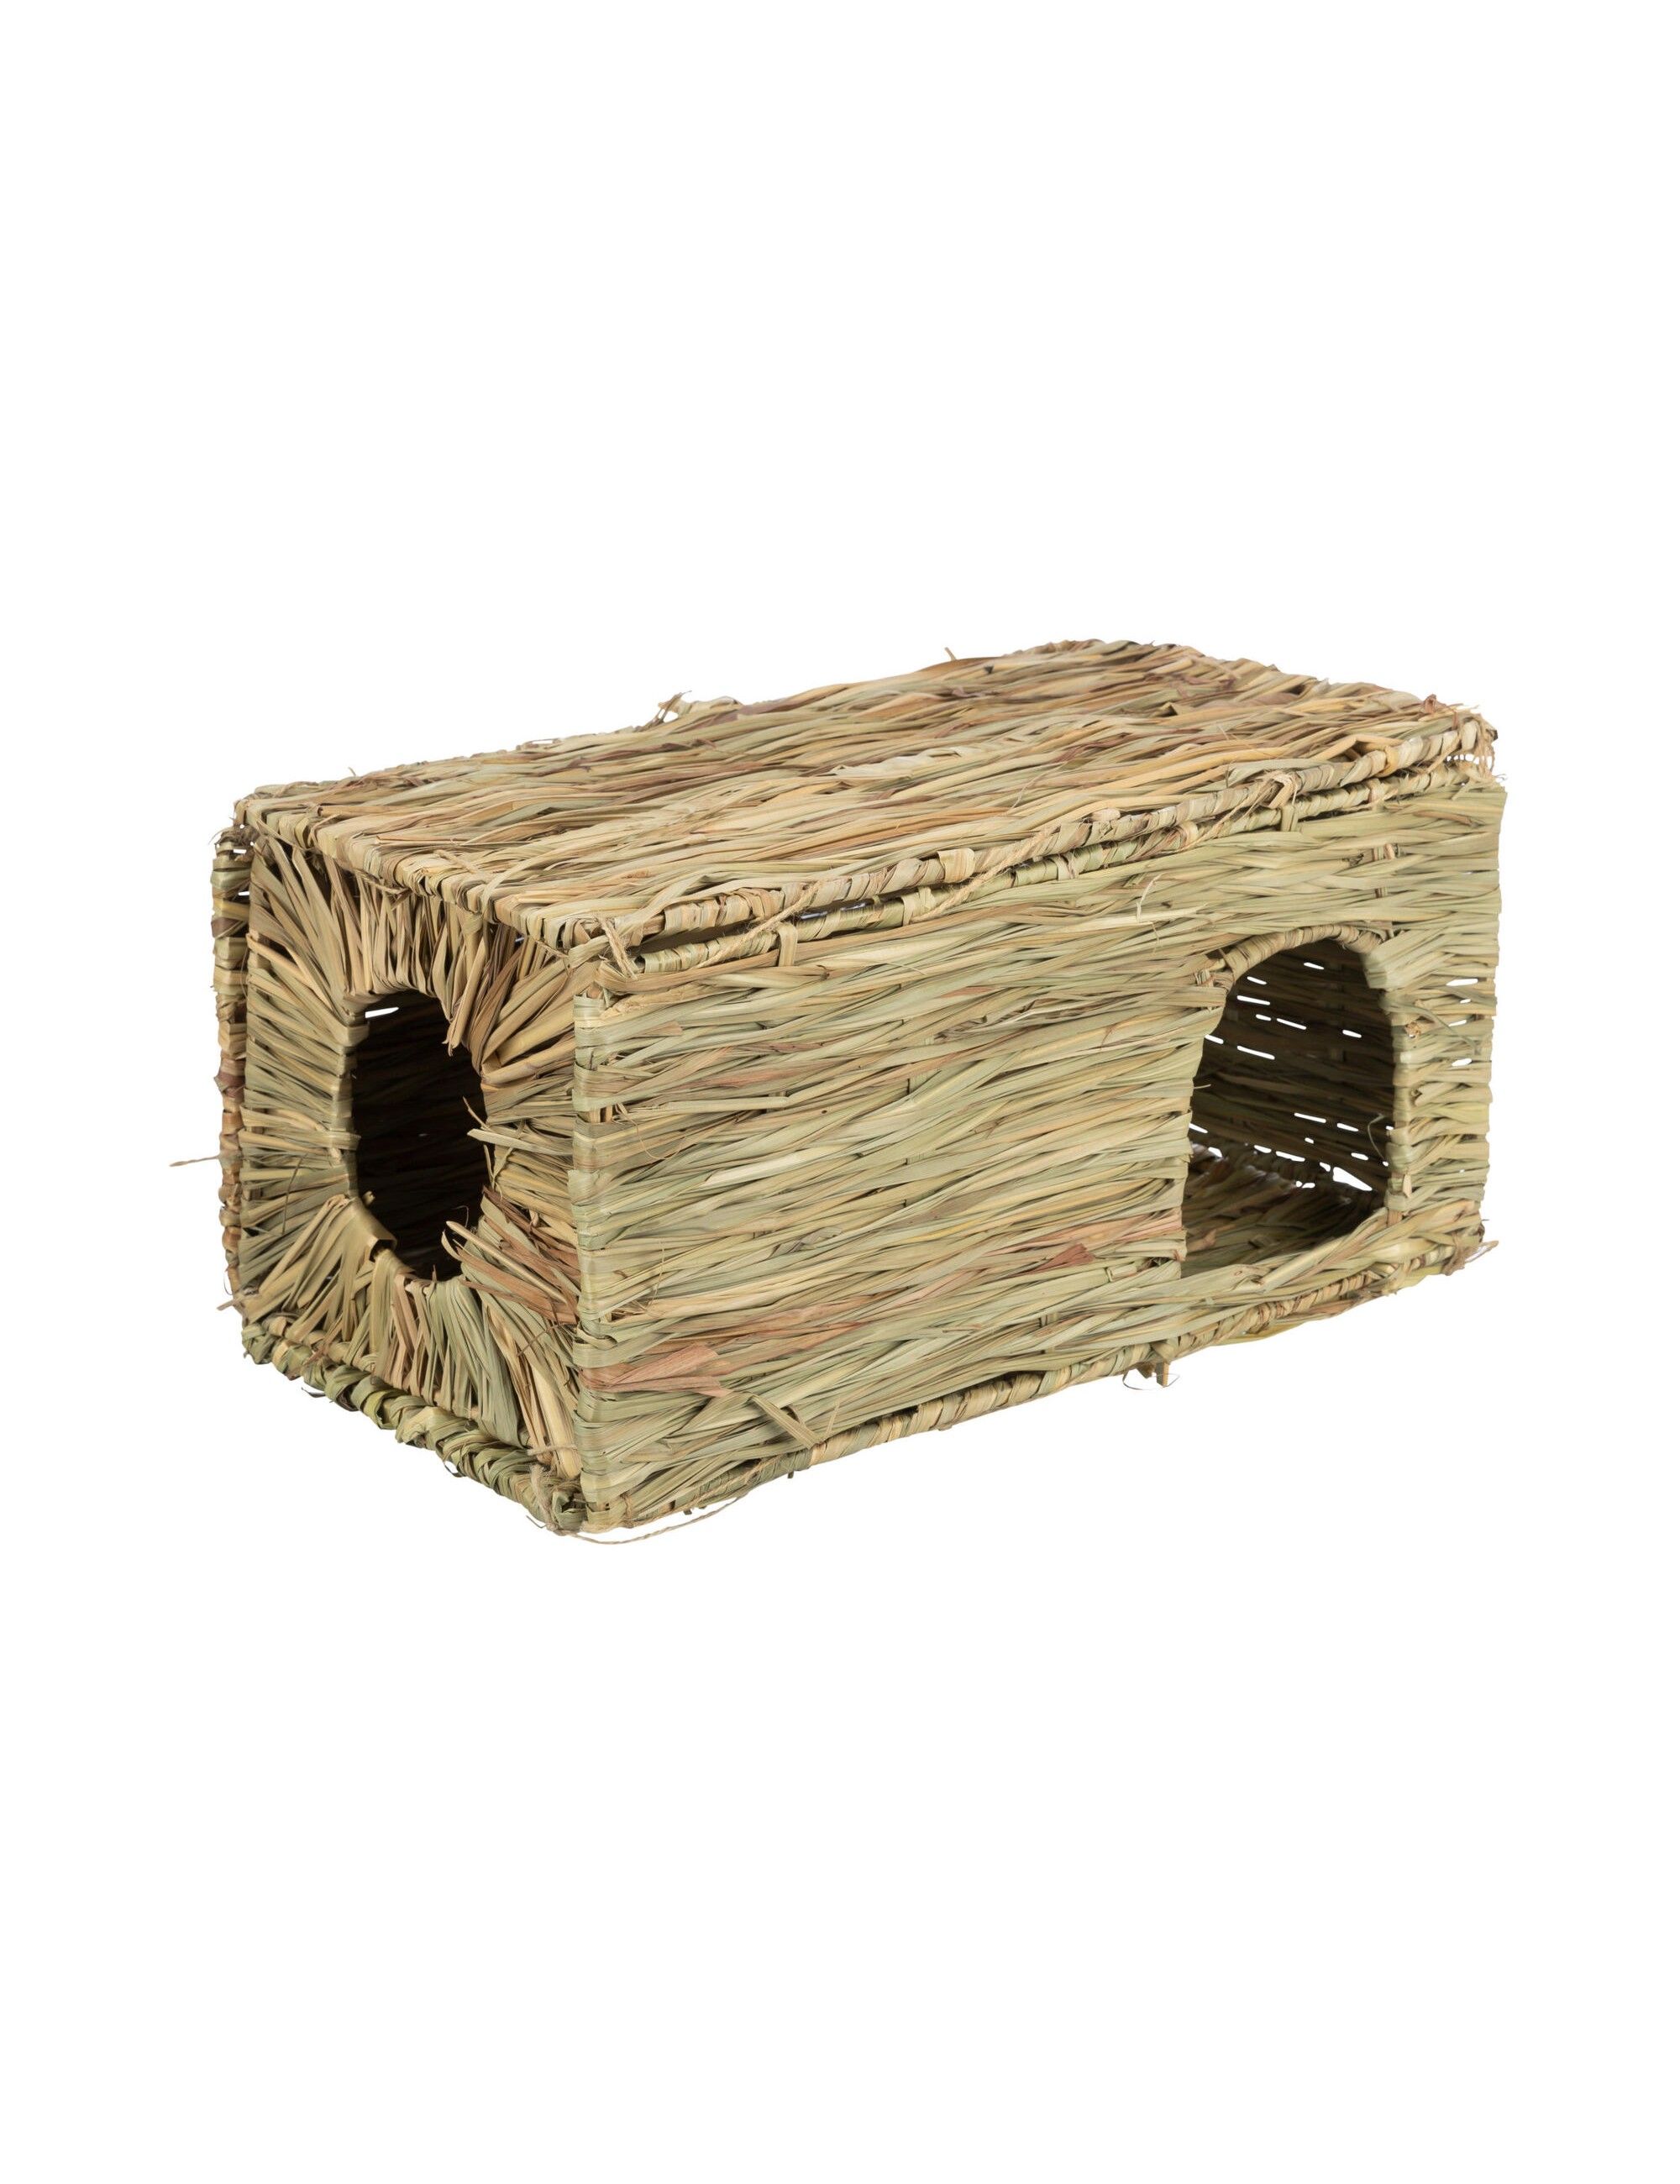 TRIXIE - Grass house for Rabbit and Guinea Pig